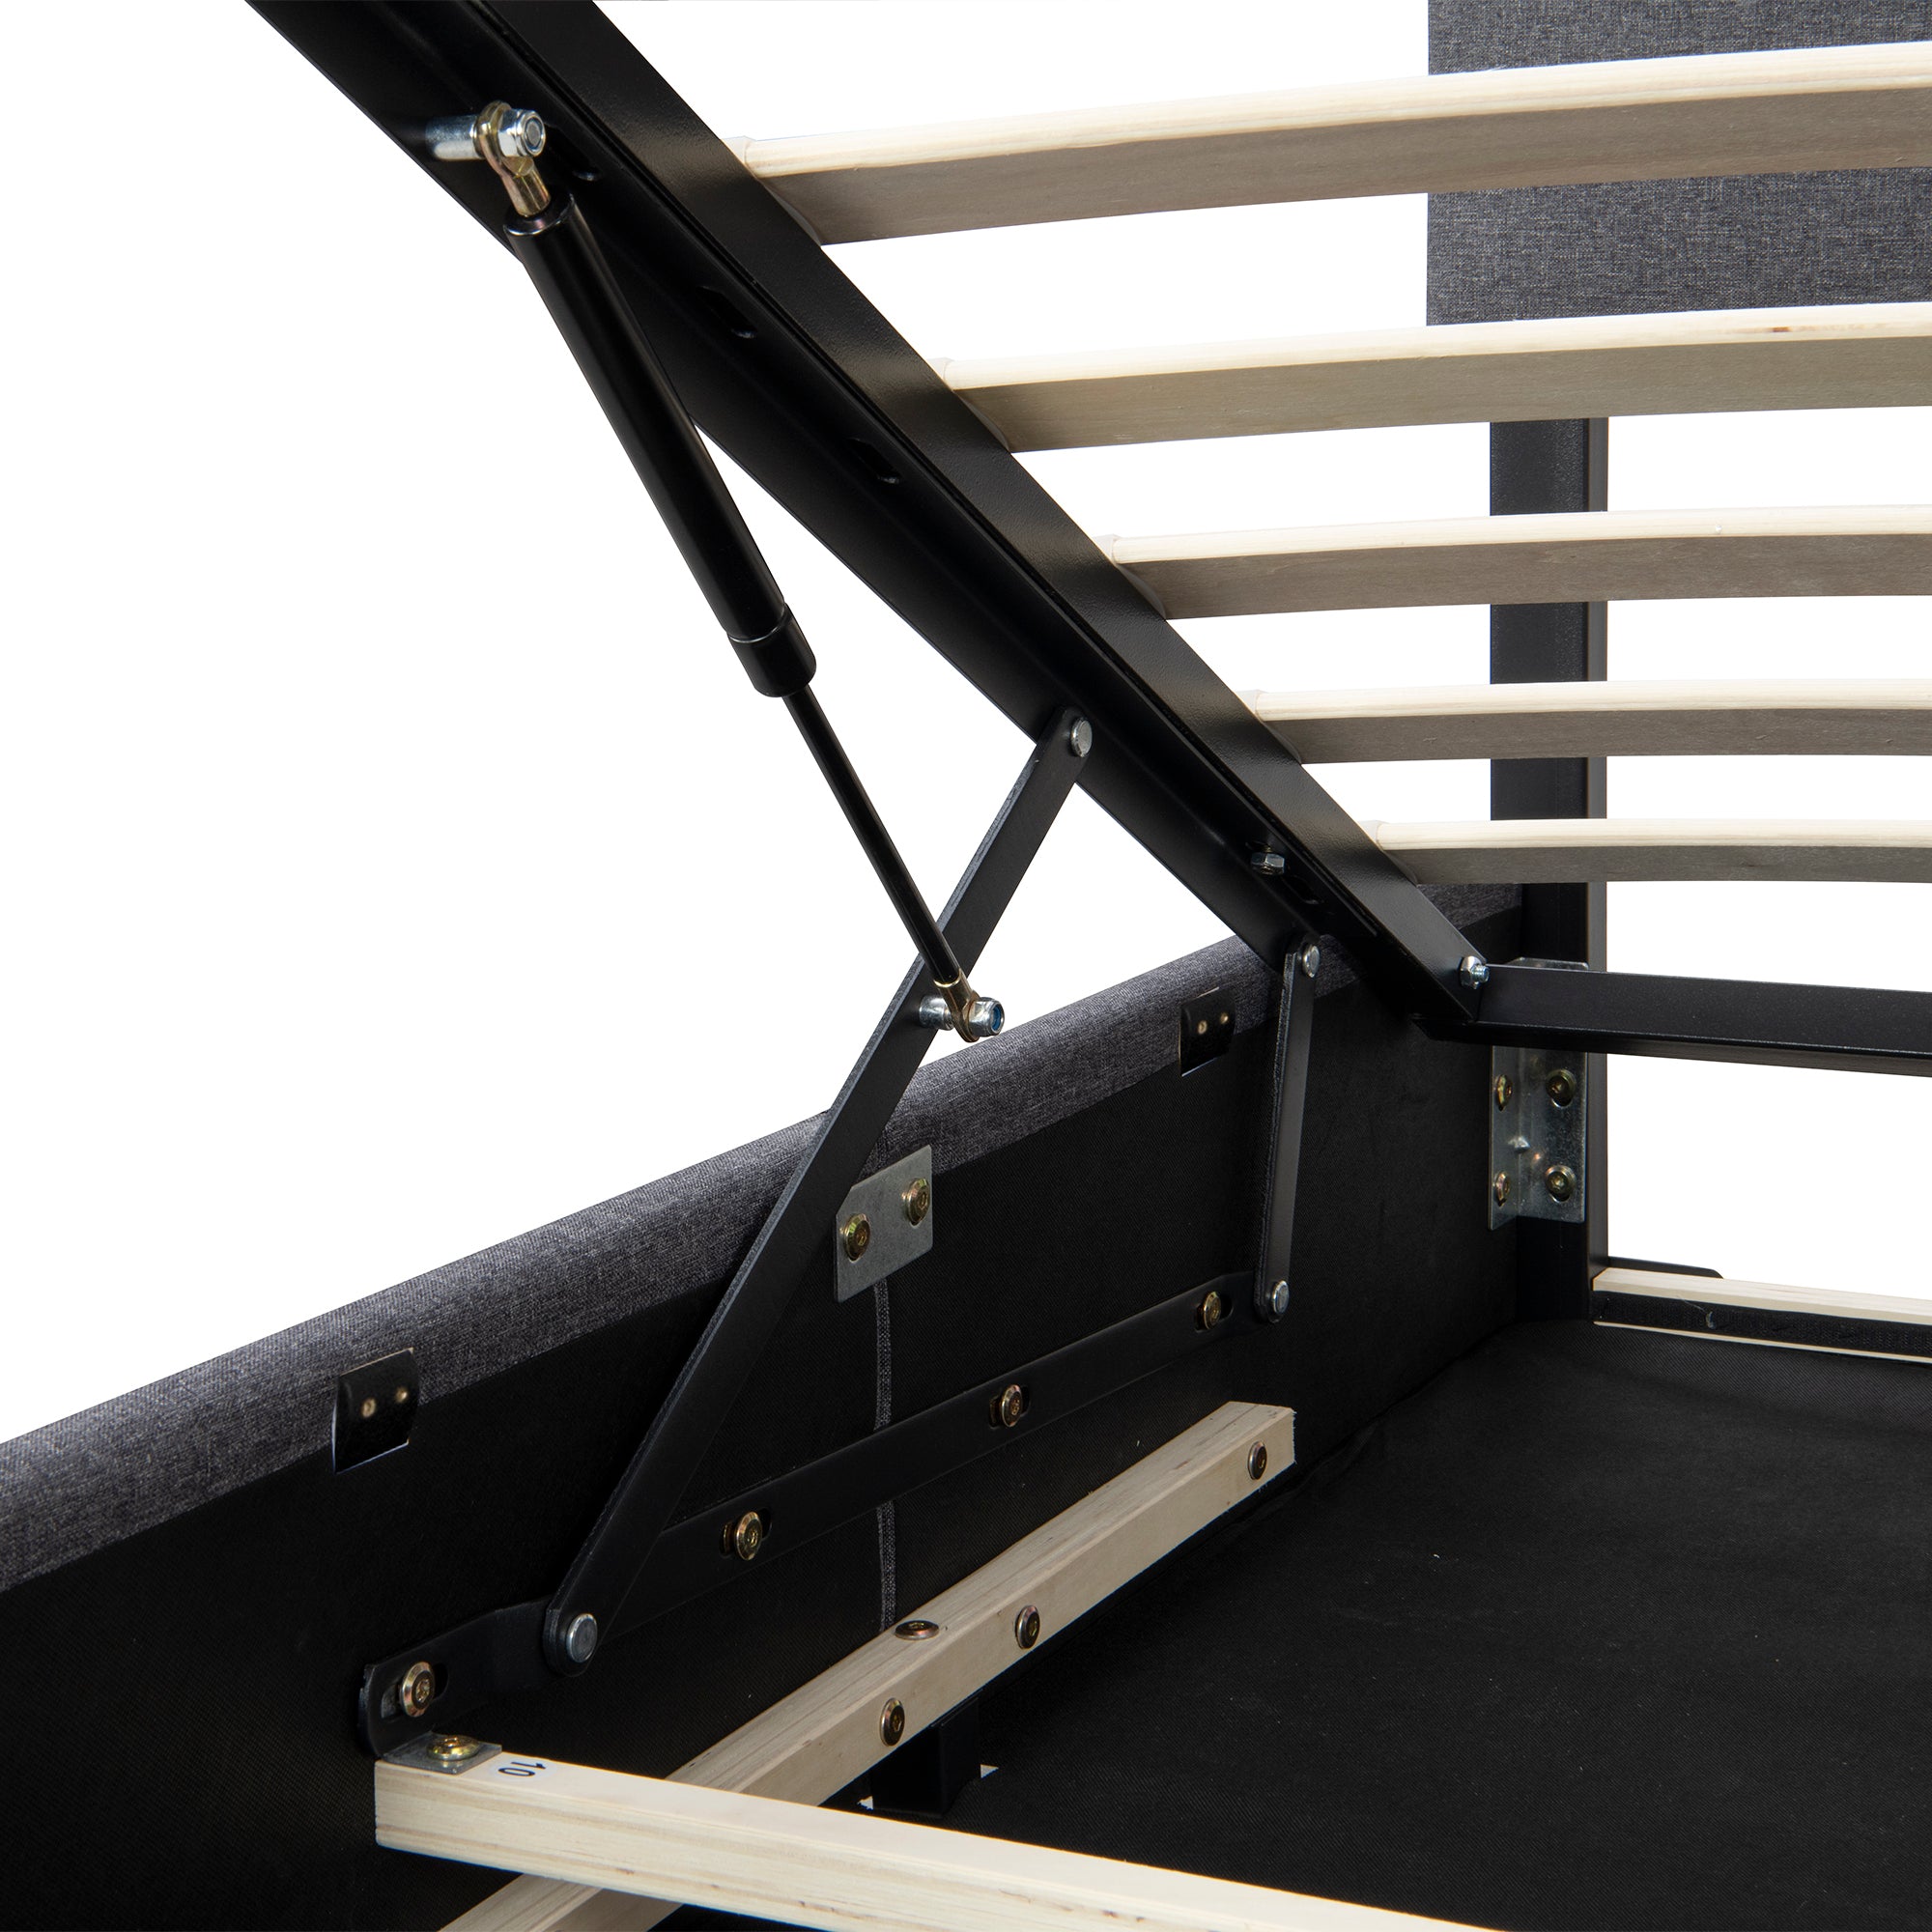 Full Upholstered Platform Bed with Lifting Storage